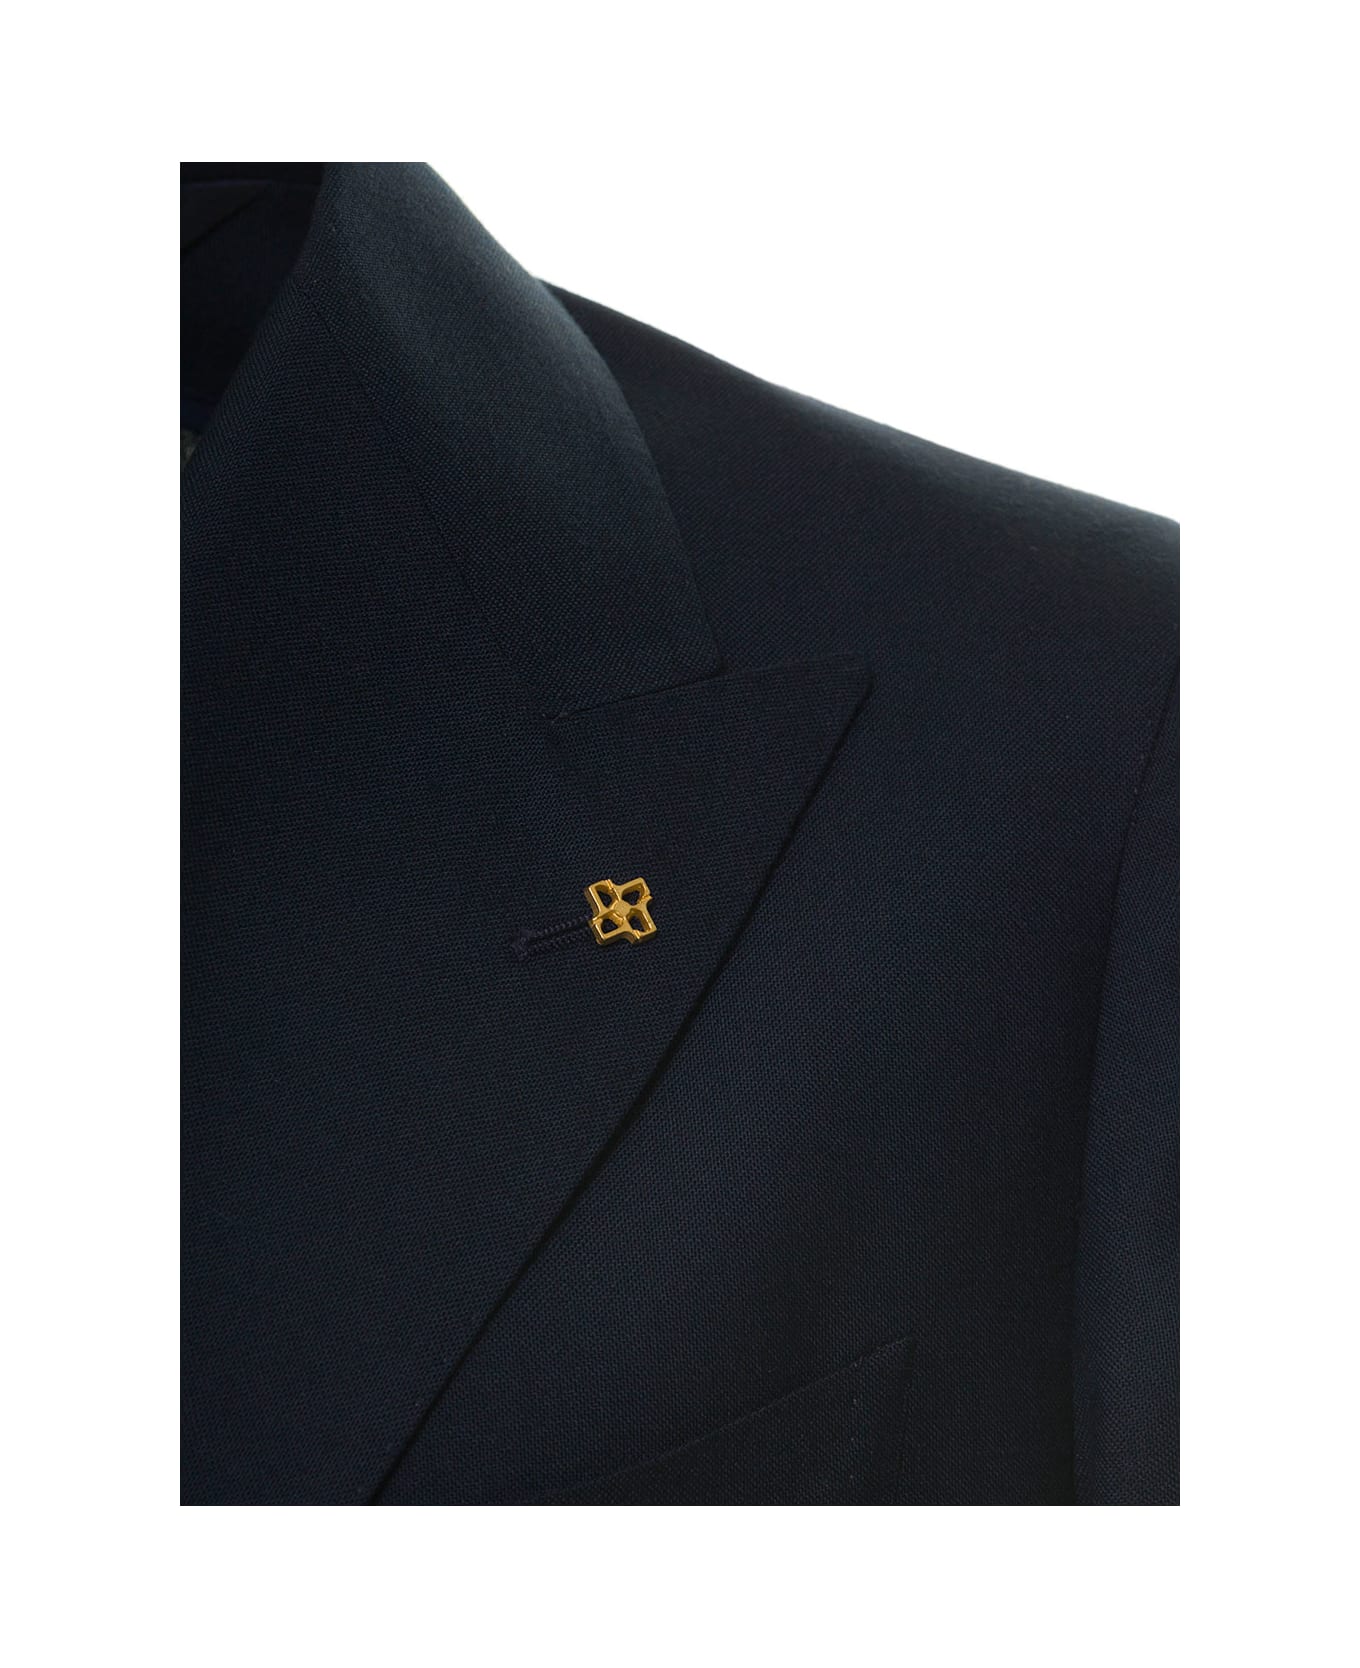 Tagliatore Blue Double-breasted Jacket With Golden Buttons Man - Blu